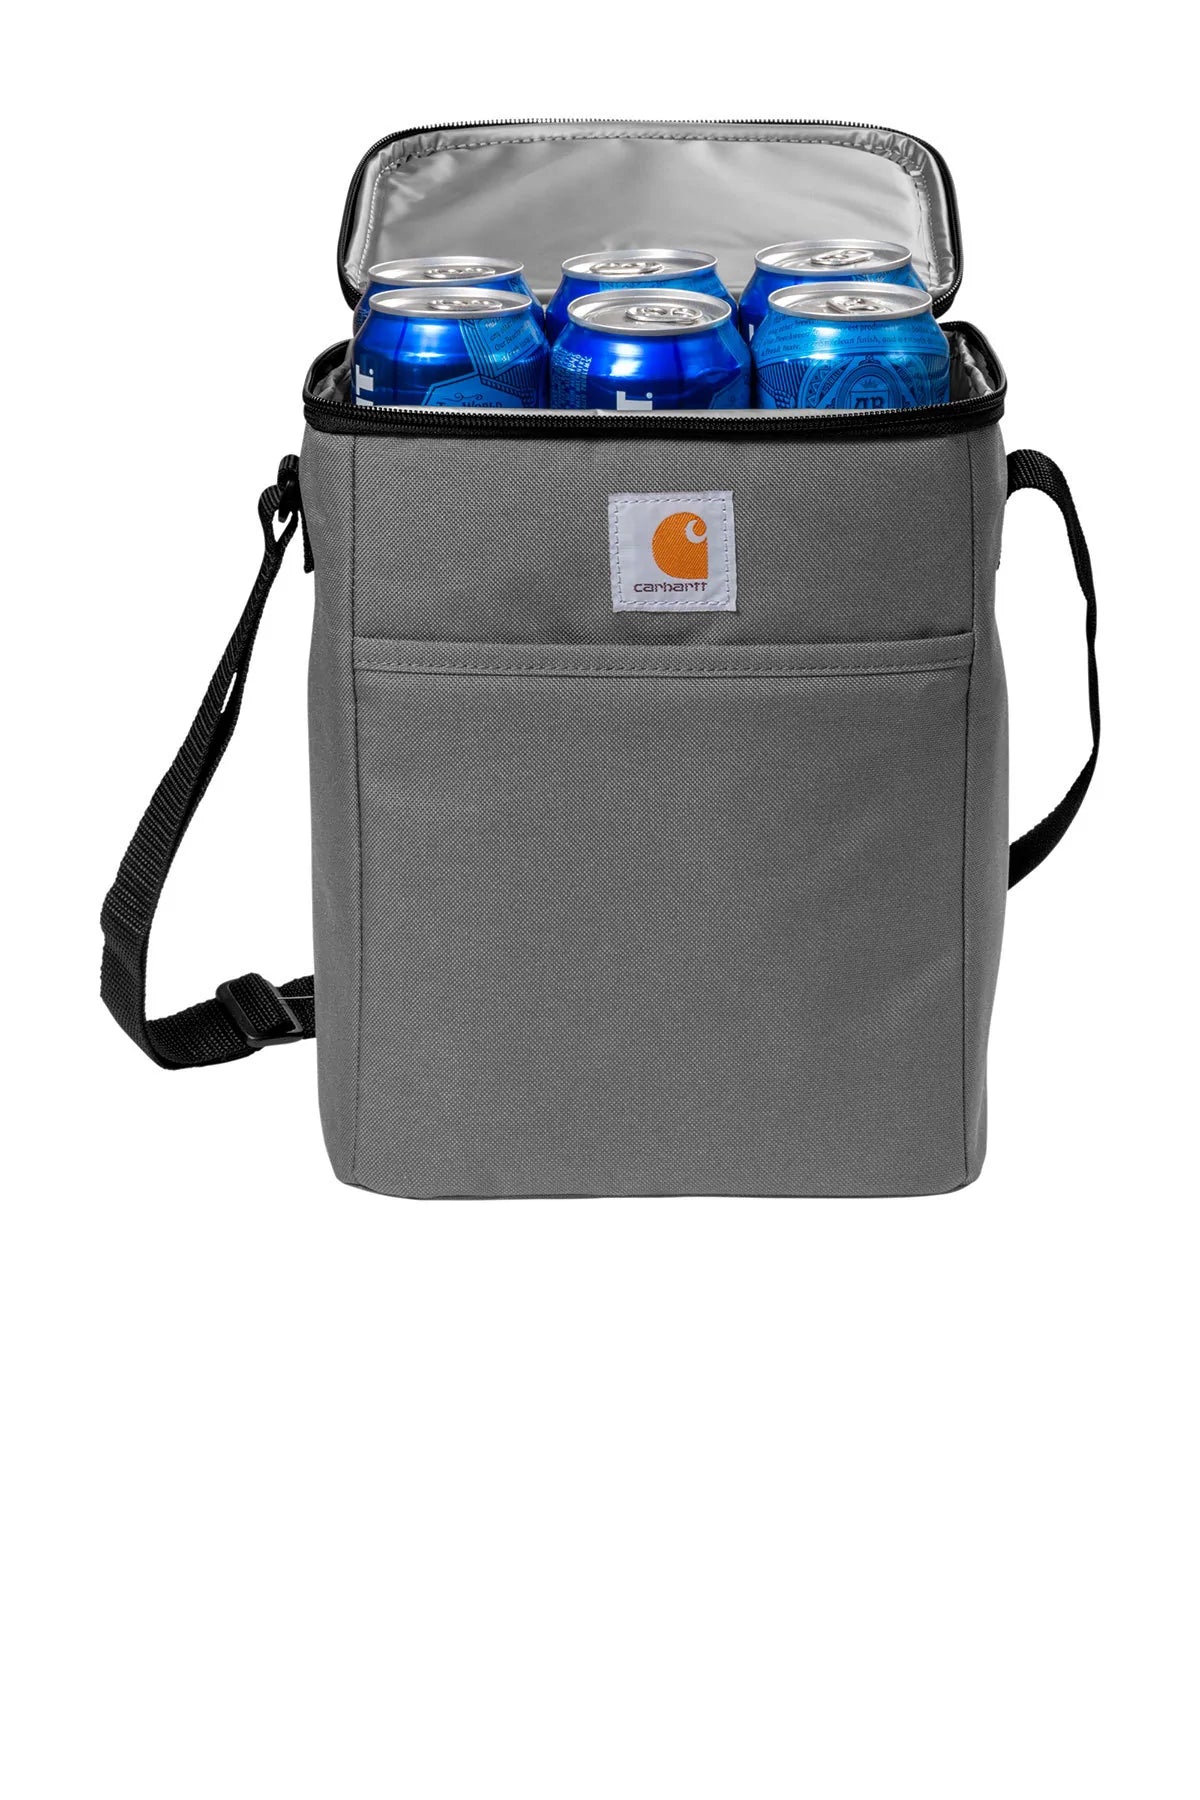 Carhartt 12-Can Cooler Grey [CR Powered by Epiroc]